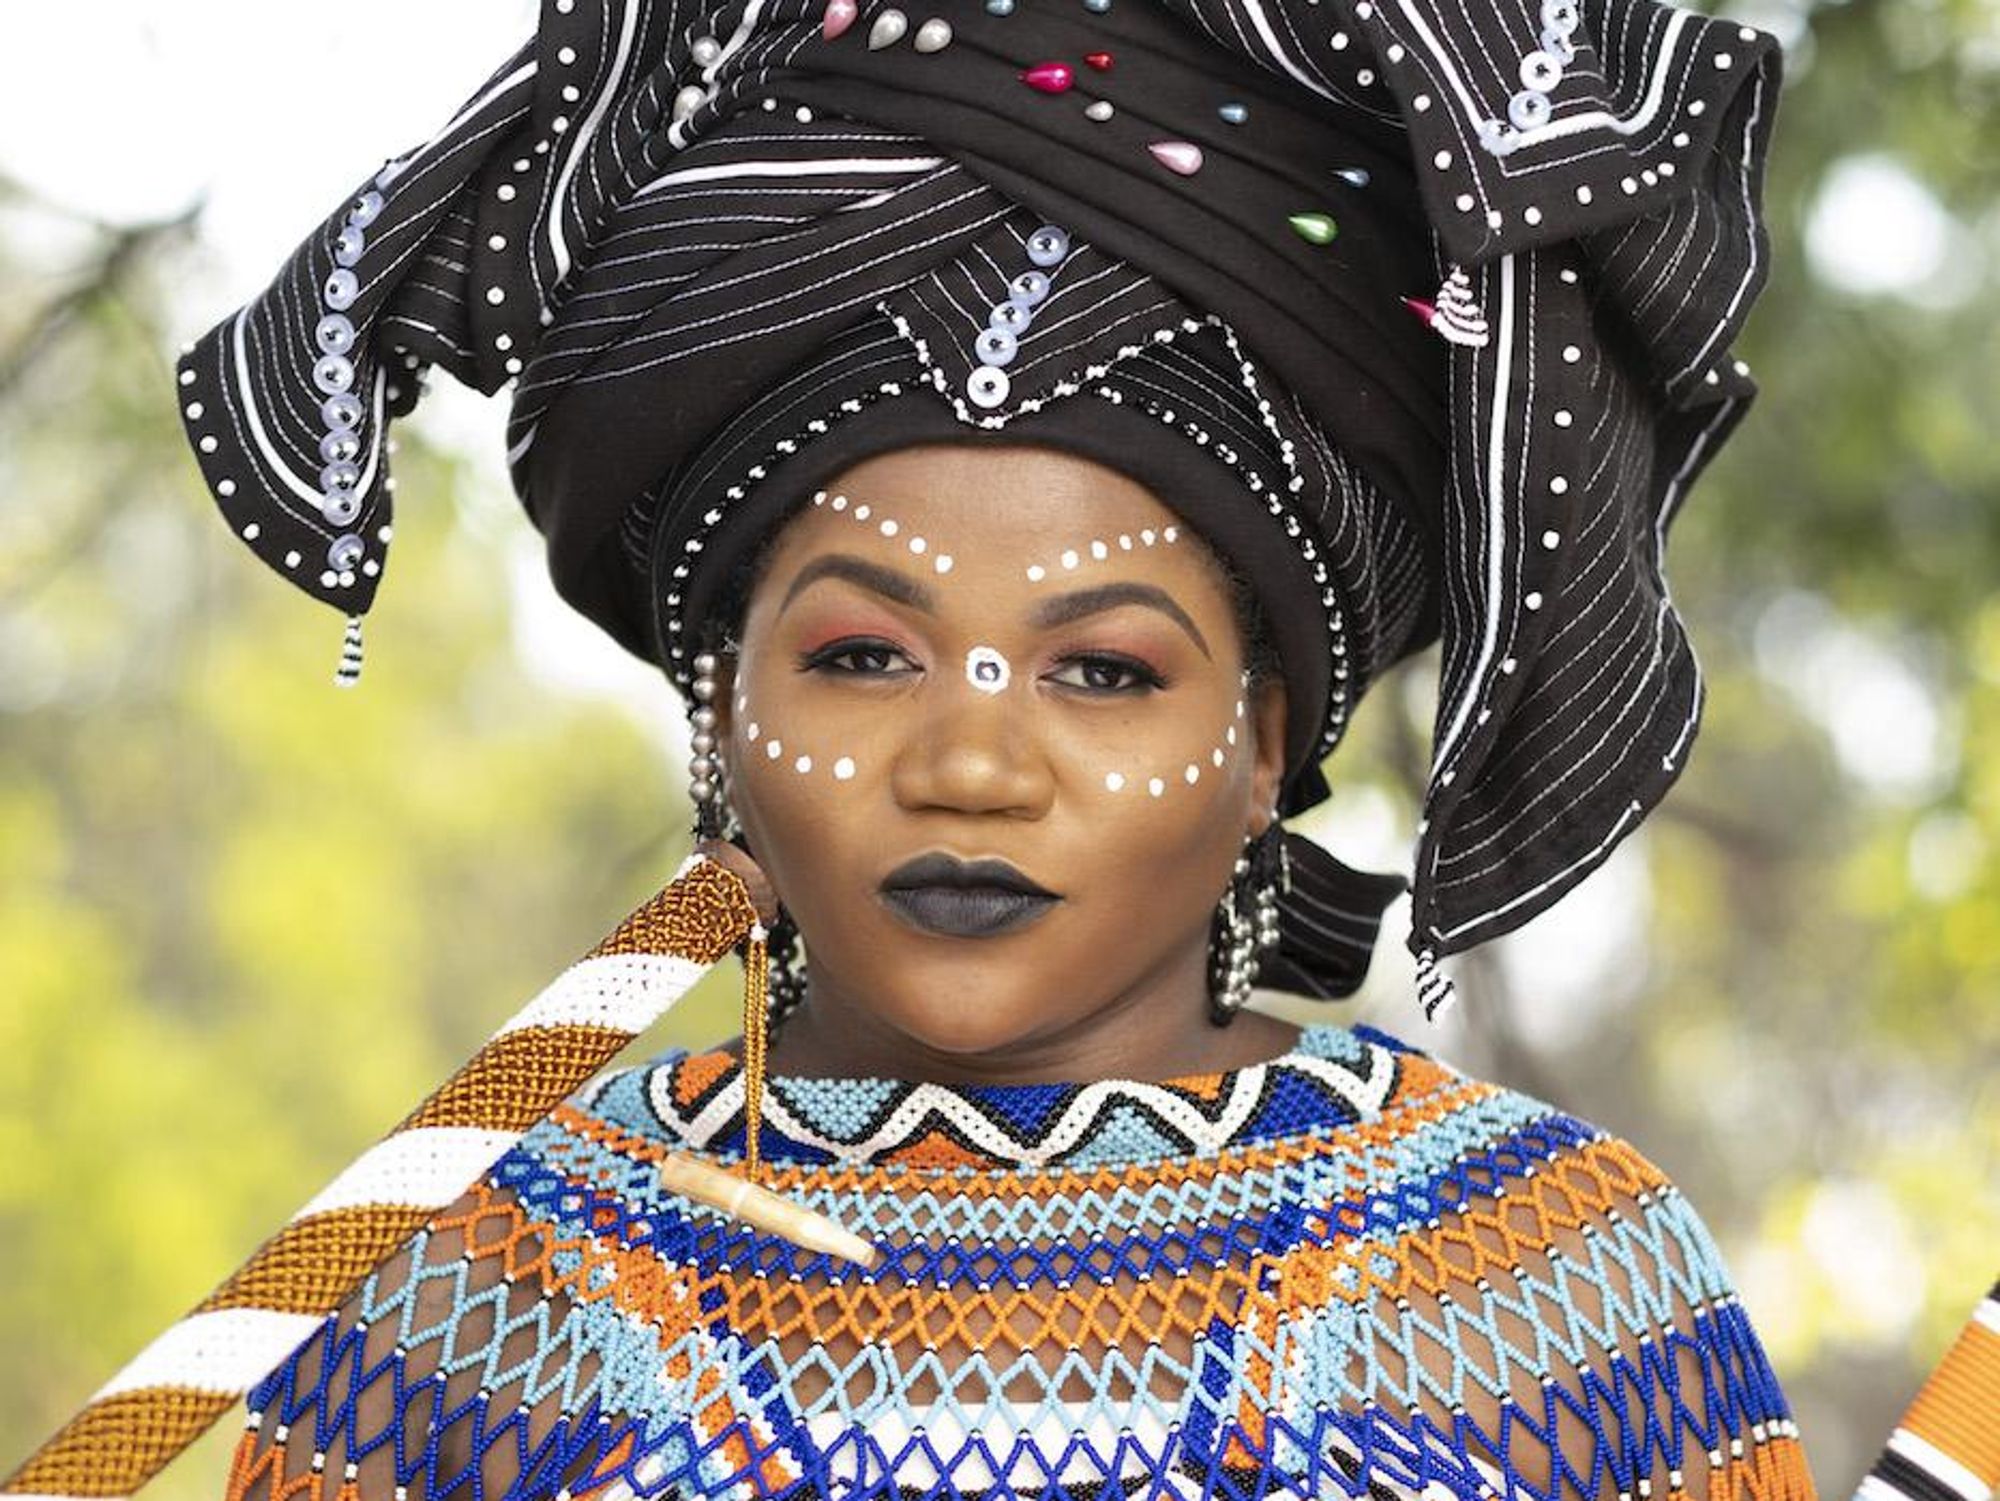 Interview: Busiswa’s New Album ‘My Side of the Story’ is Laced with Deliberate Messages of Empowerment